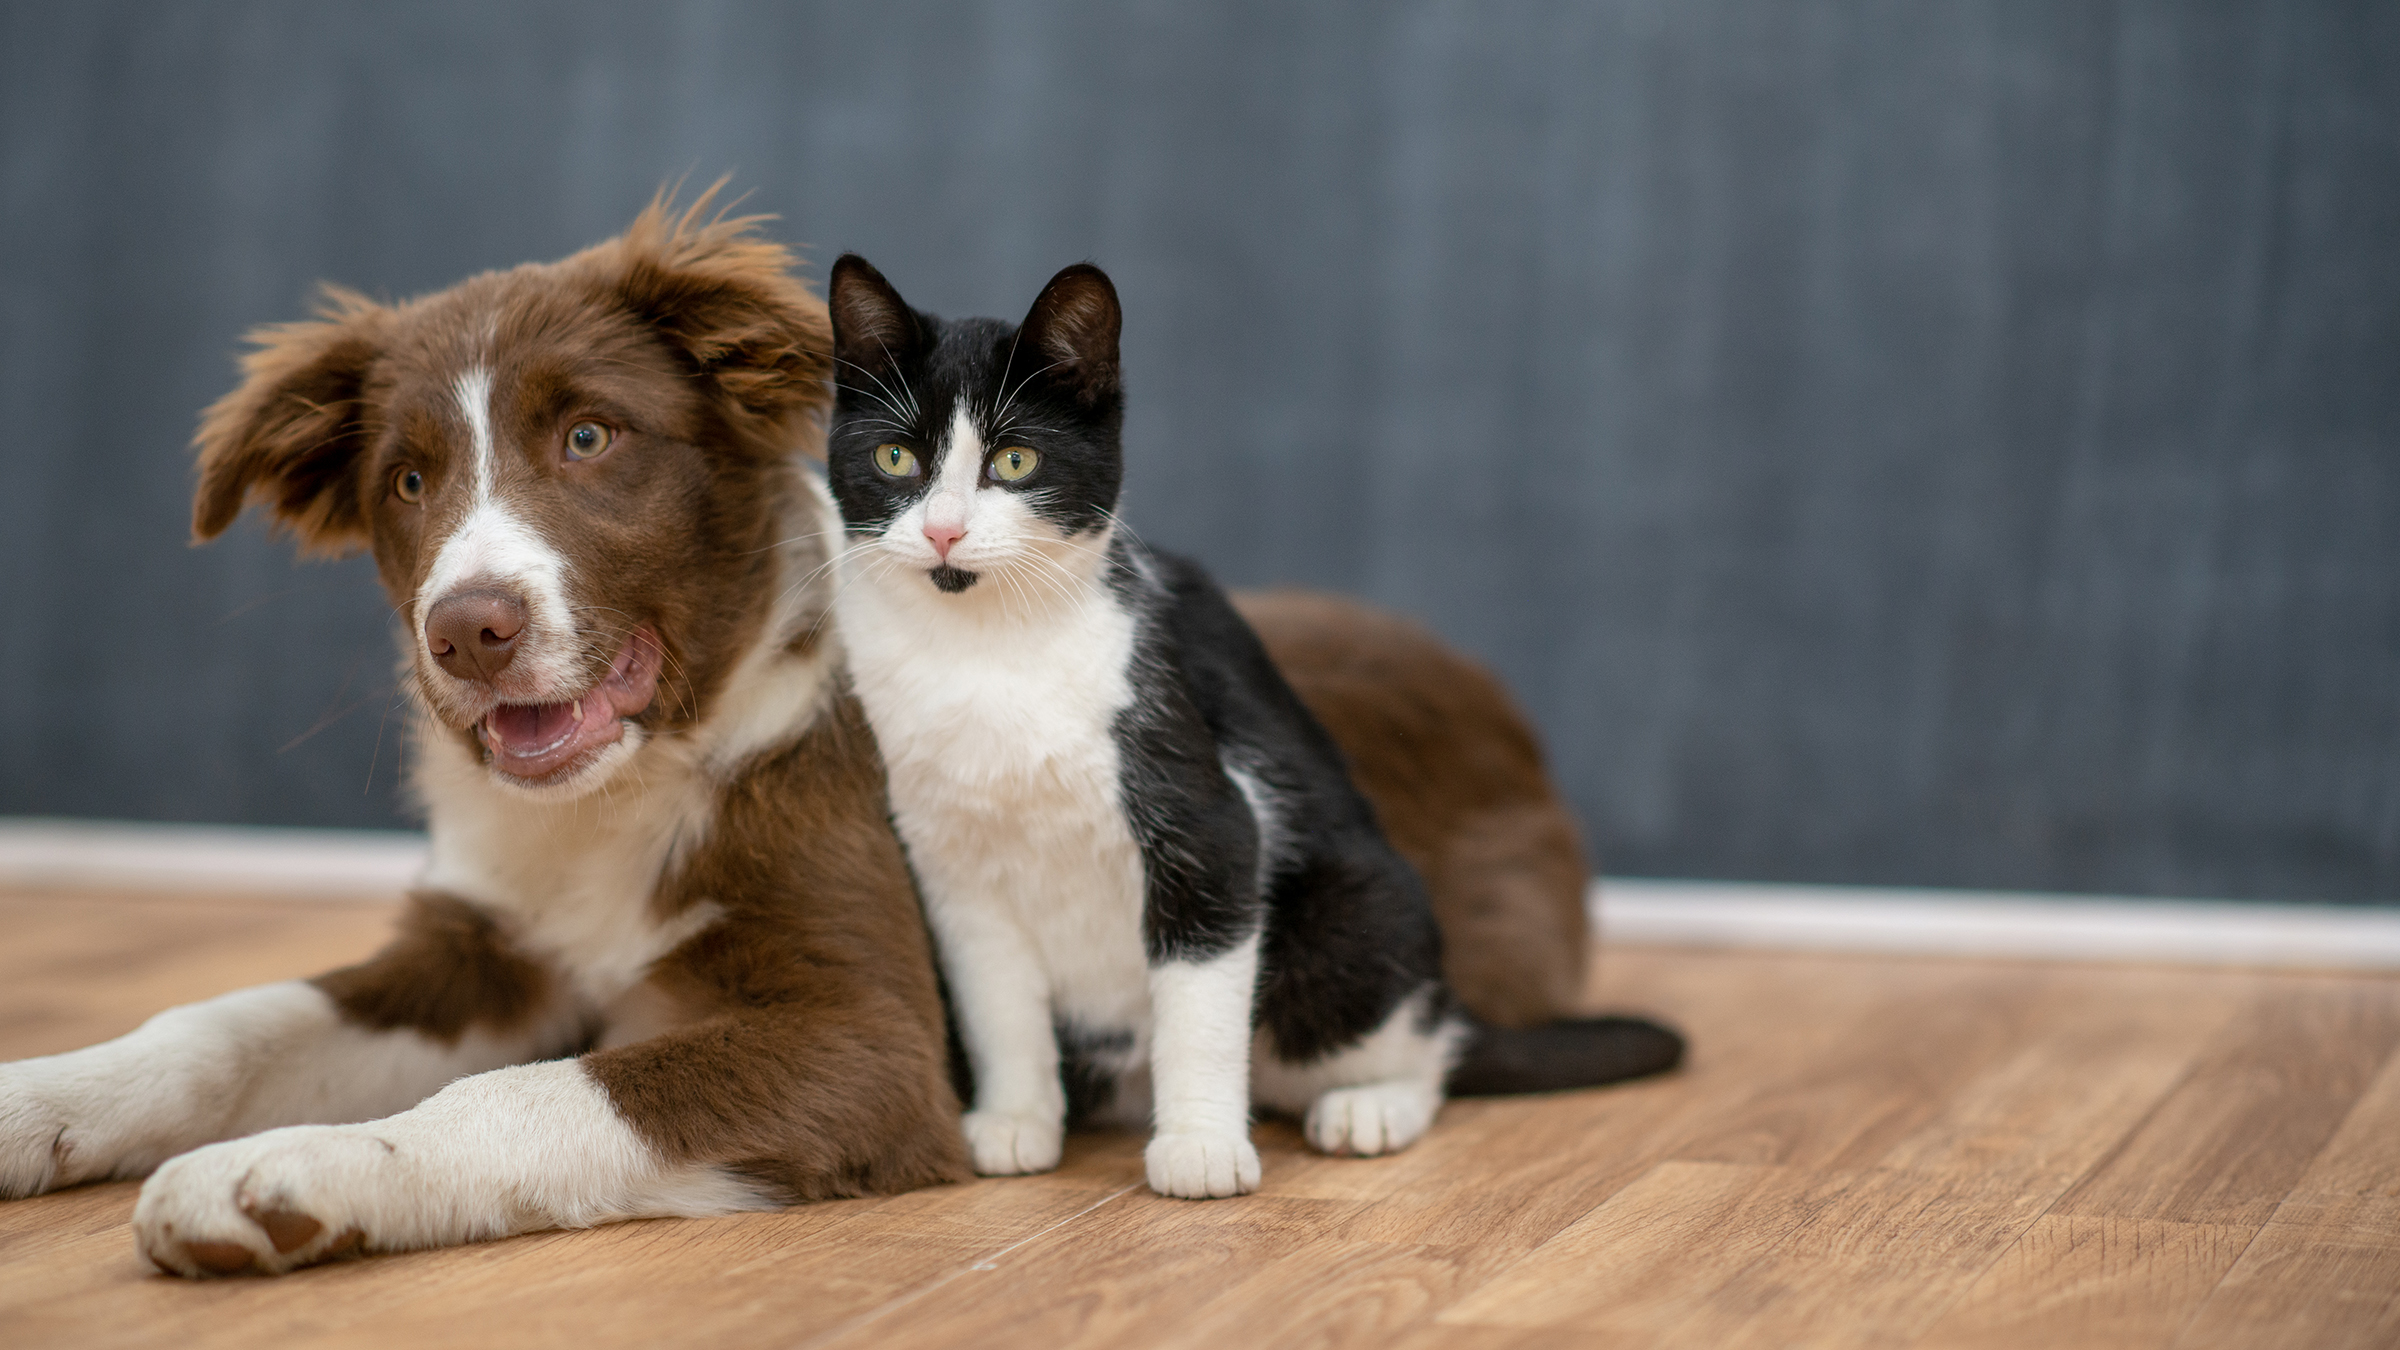 Can Dogs (or Cats) Get COVID-19? Here Are the Facts - GoodRx